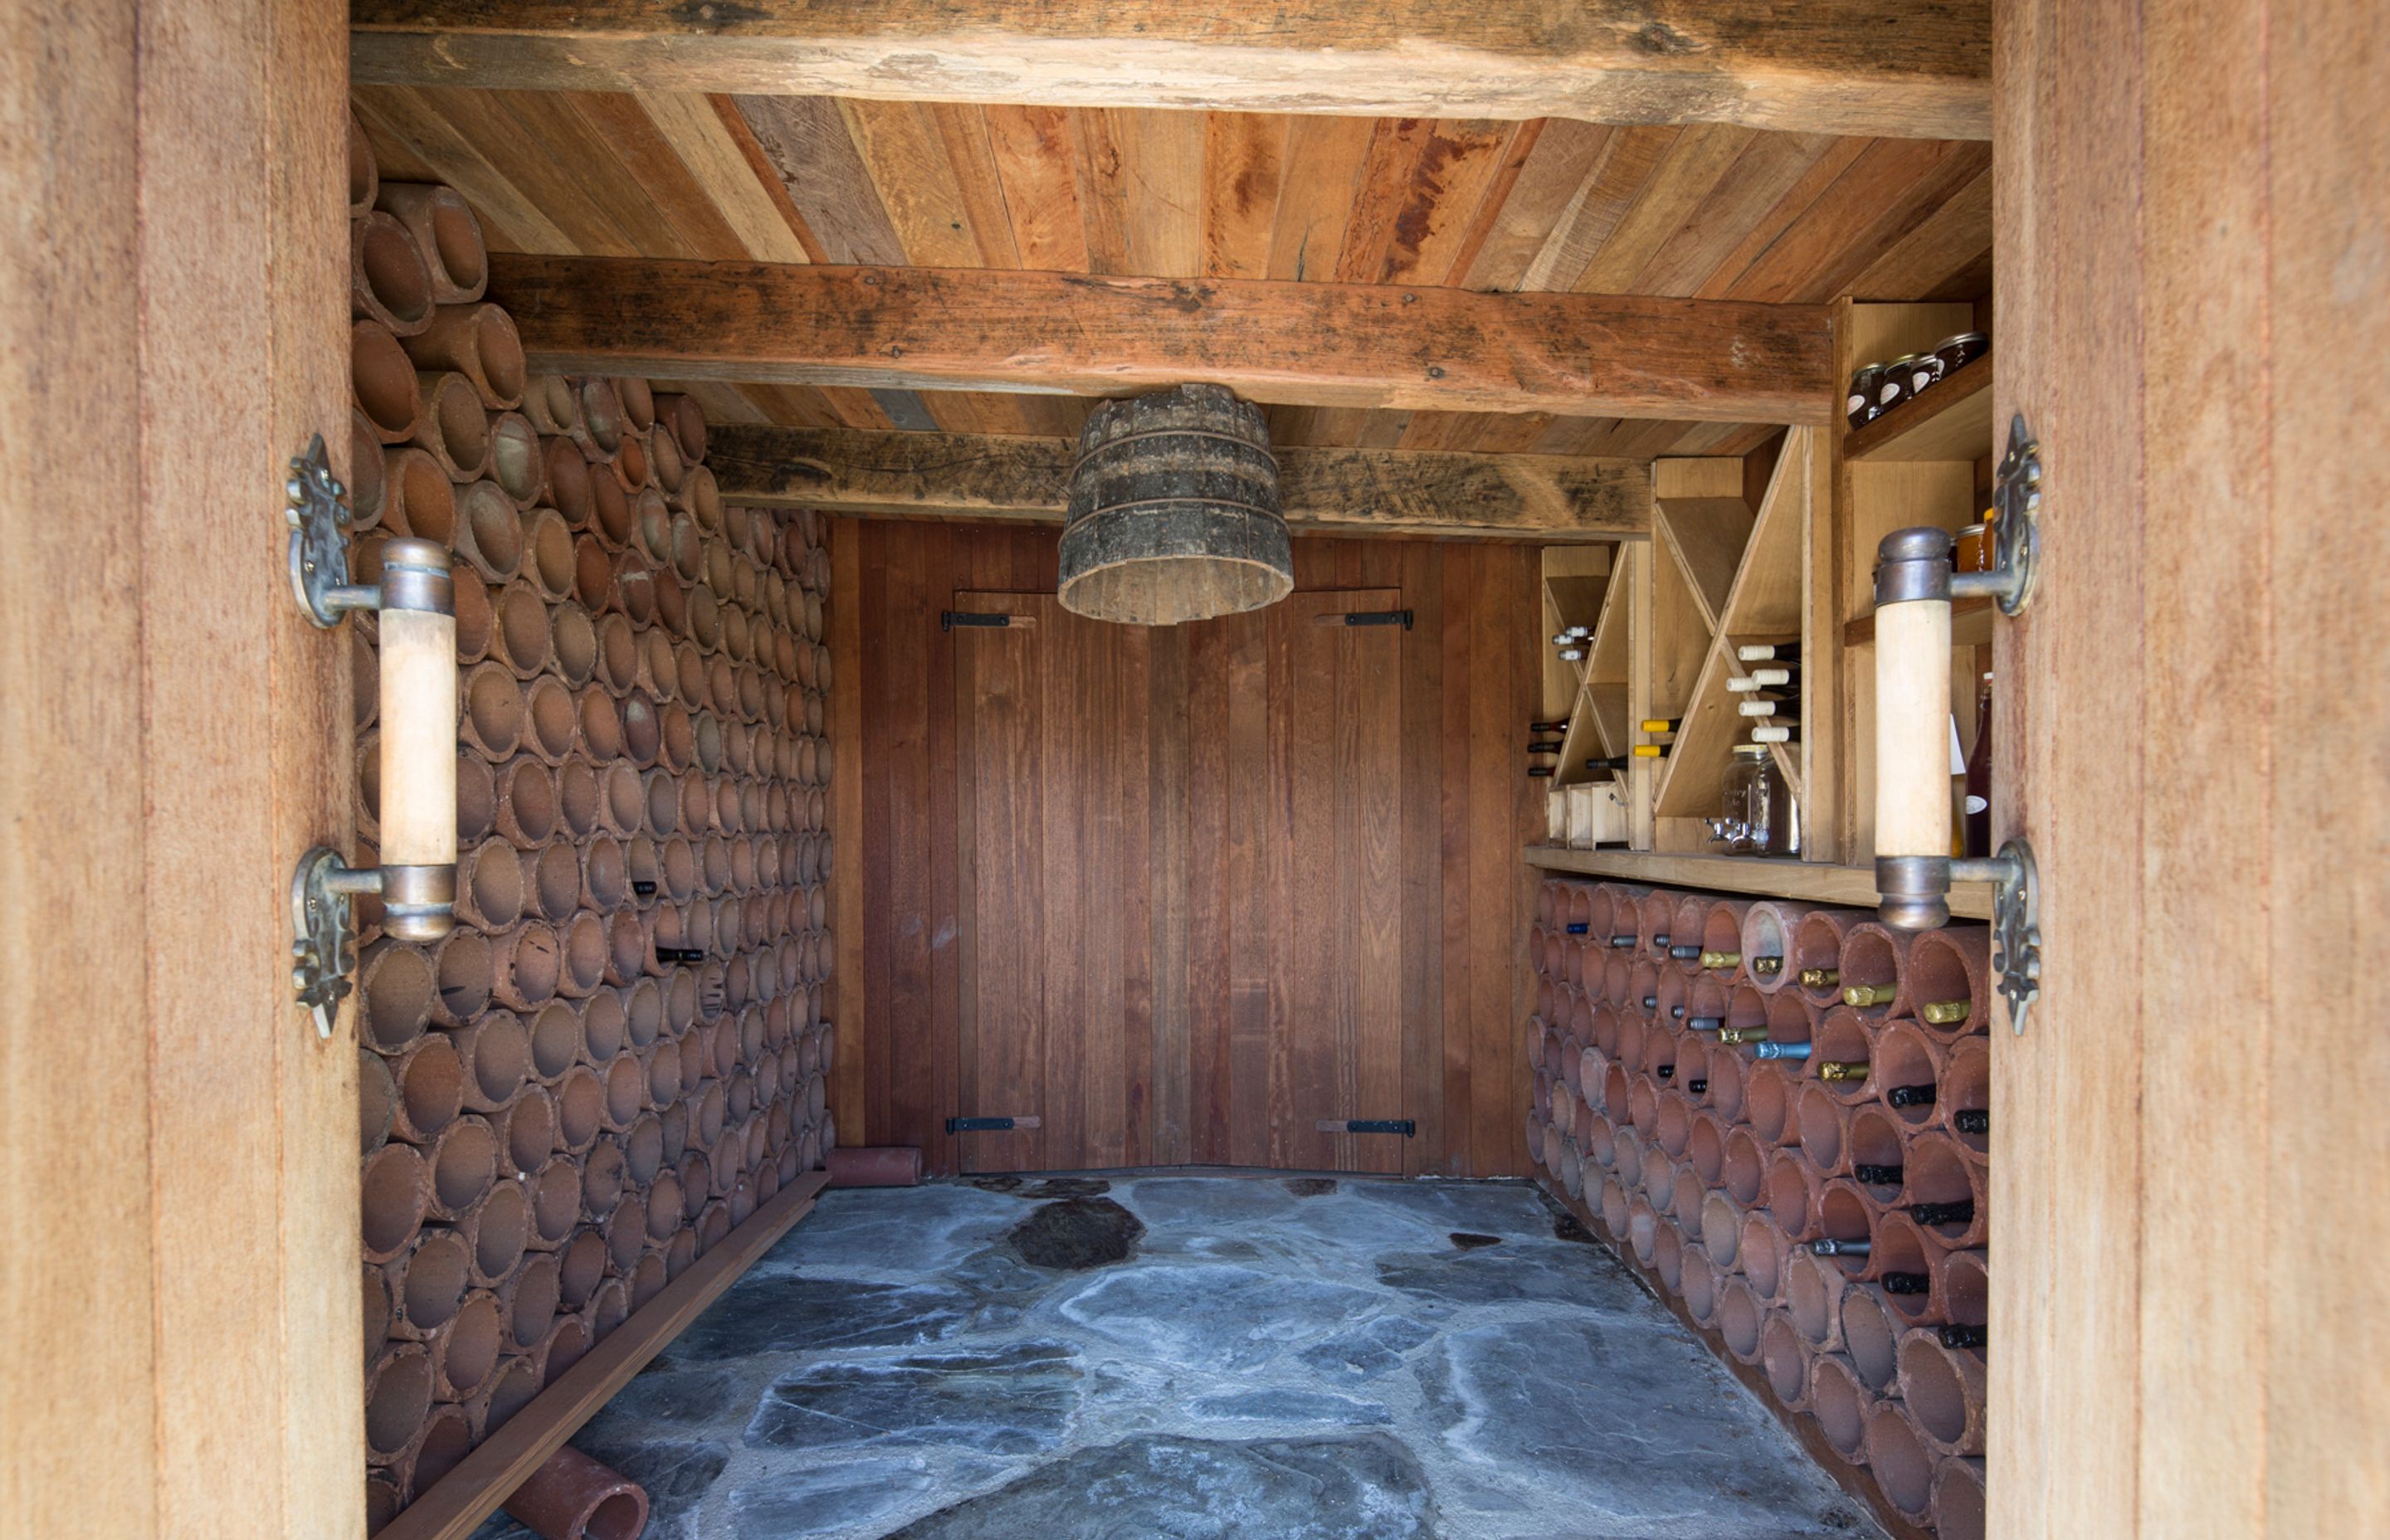 Perfectly insulated, the wine cellar nestles back into a natural outcropping.